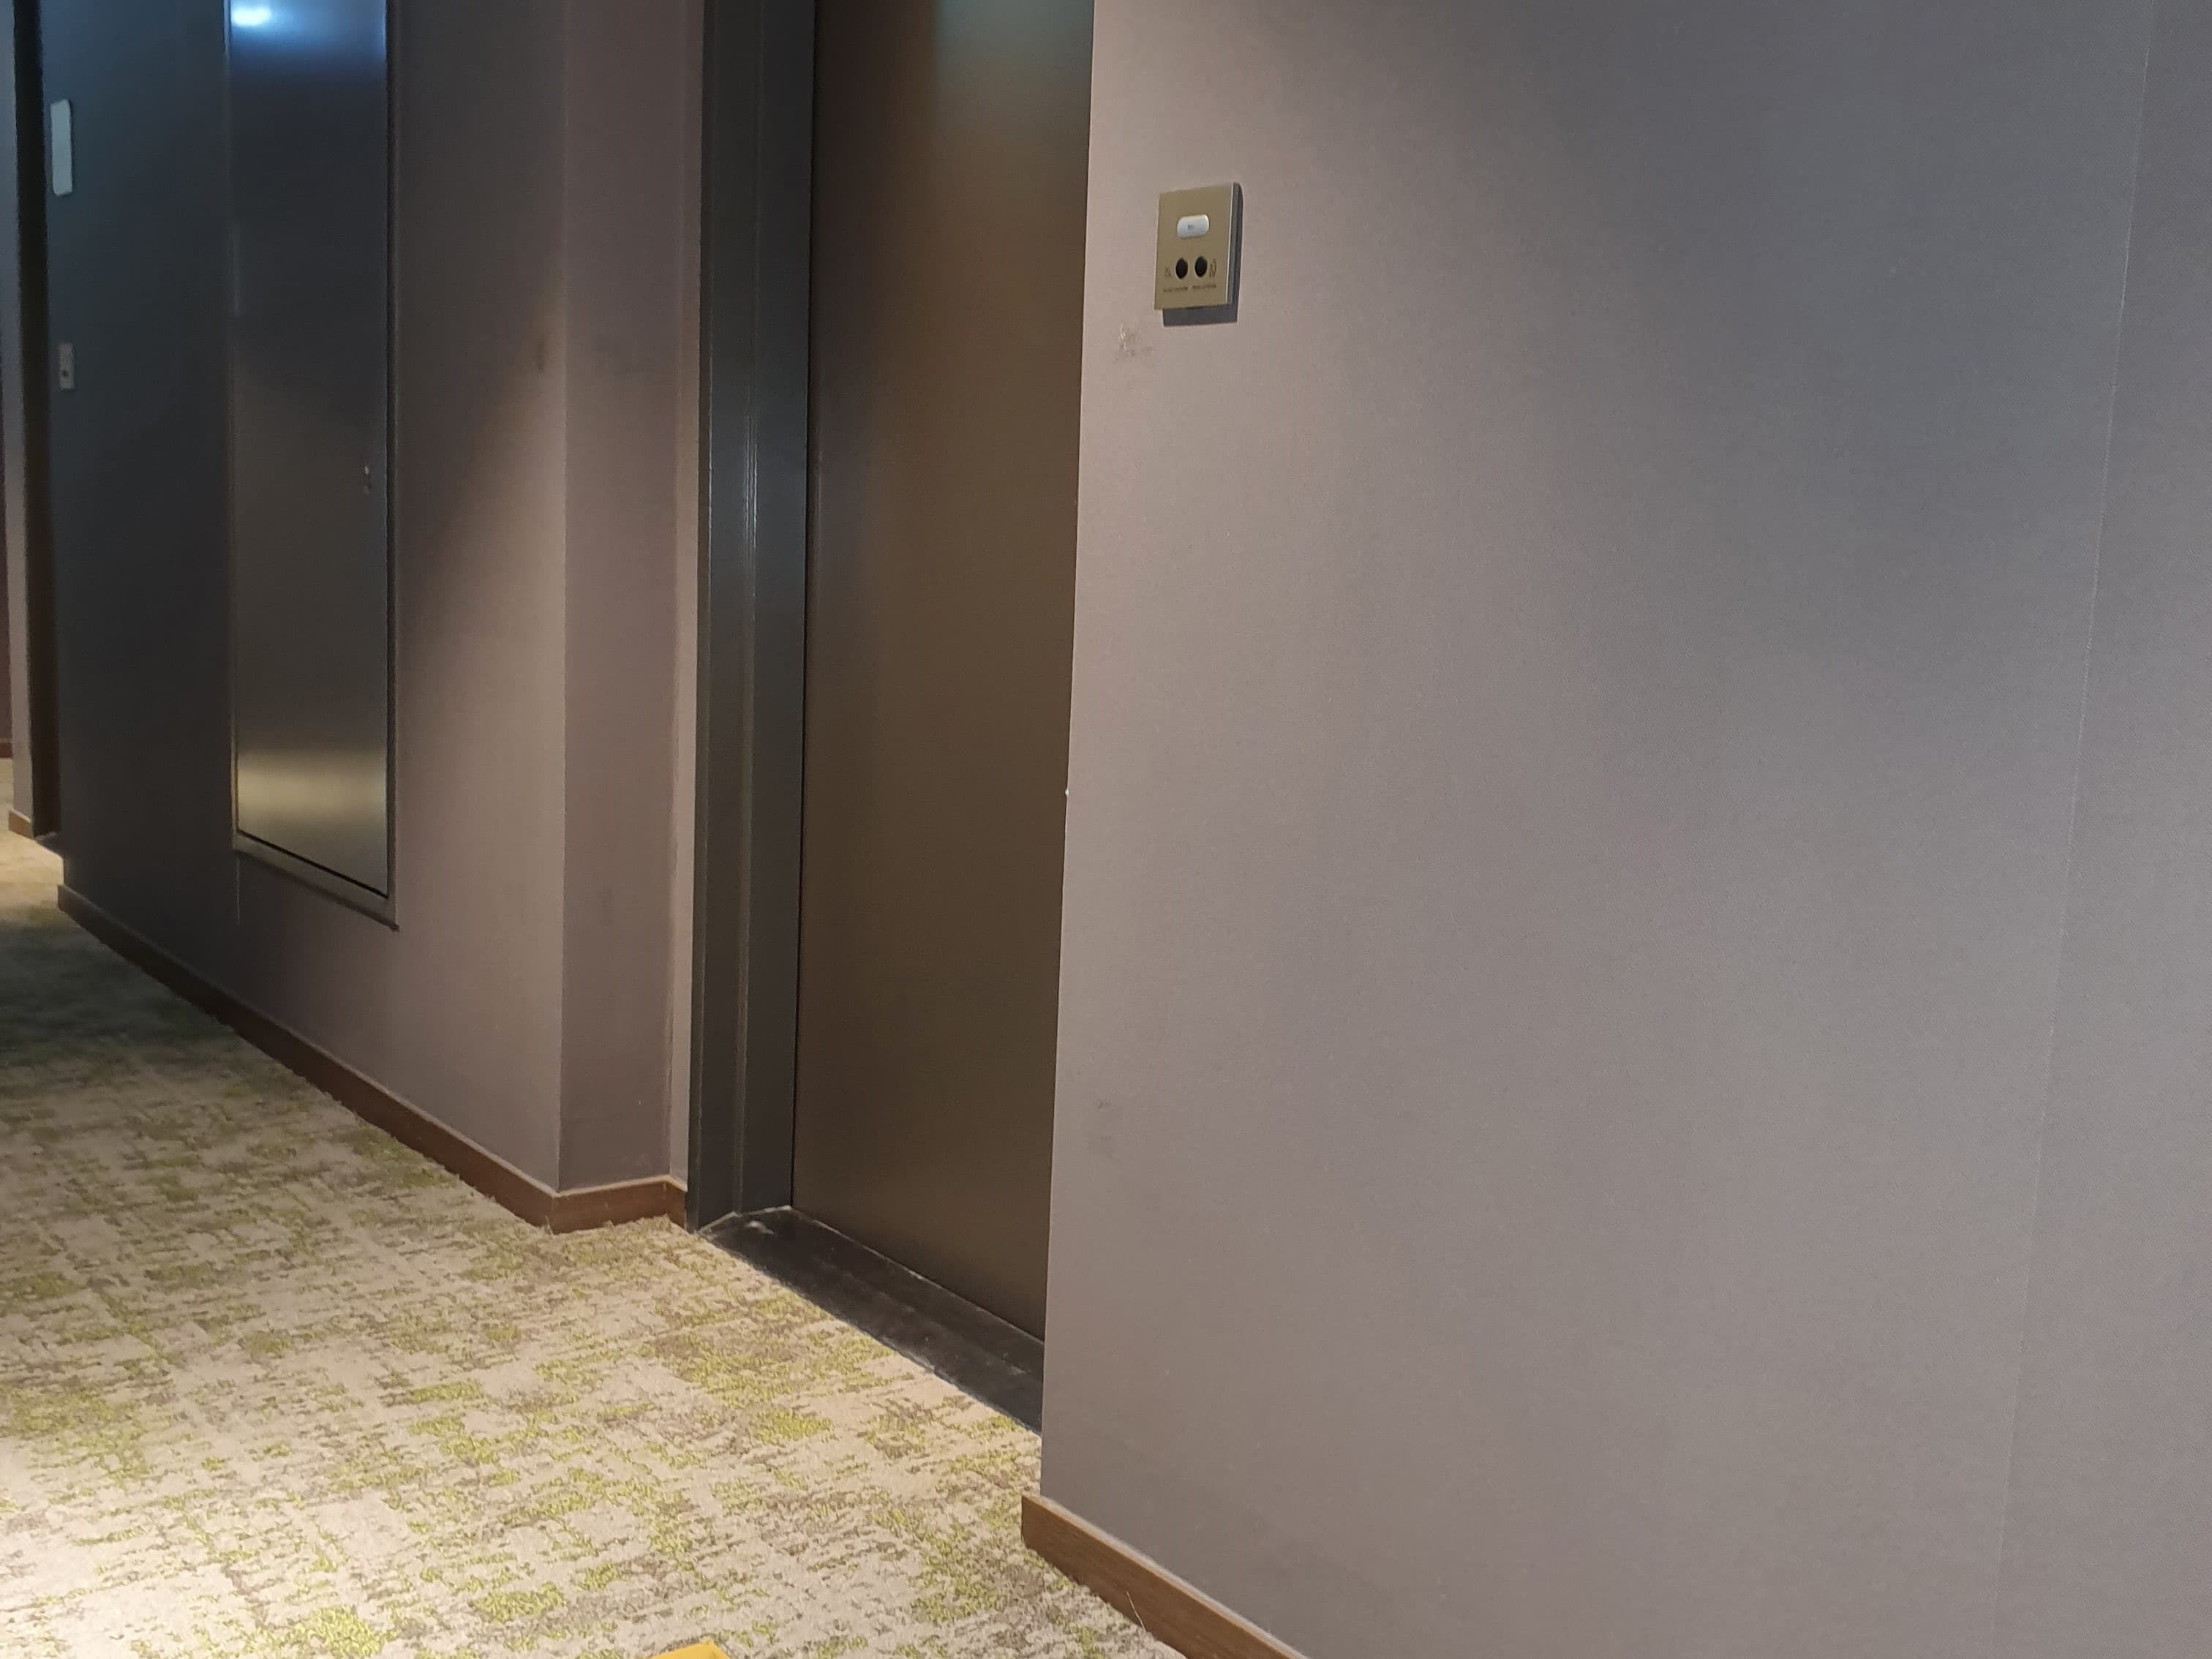 Accessible guestroom0 : Hotel room door with a gently inclined threshold